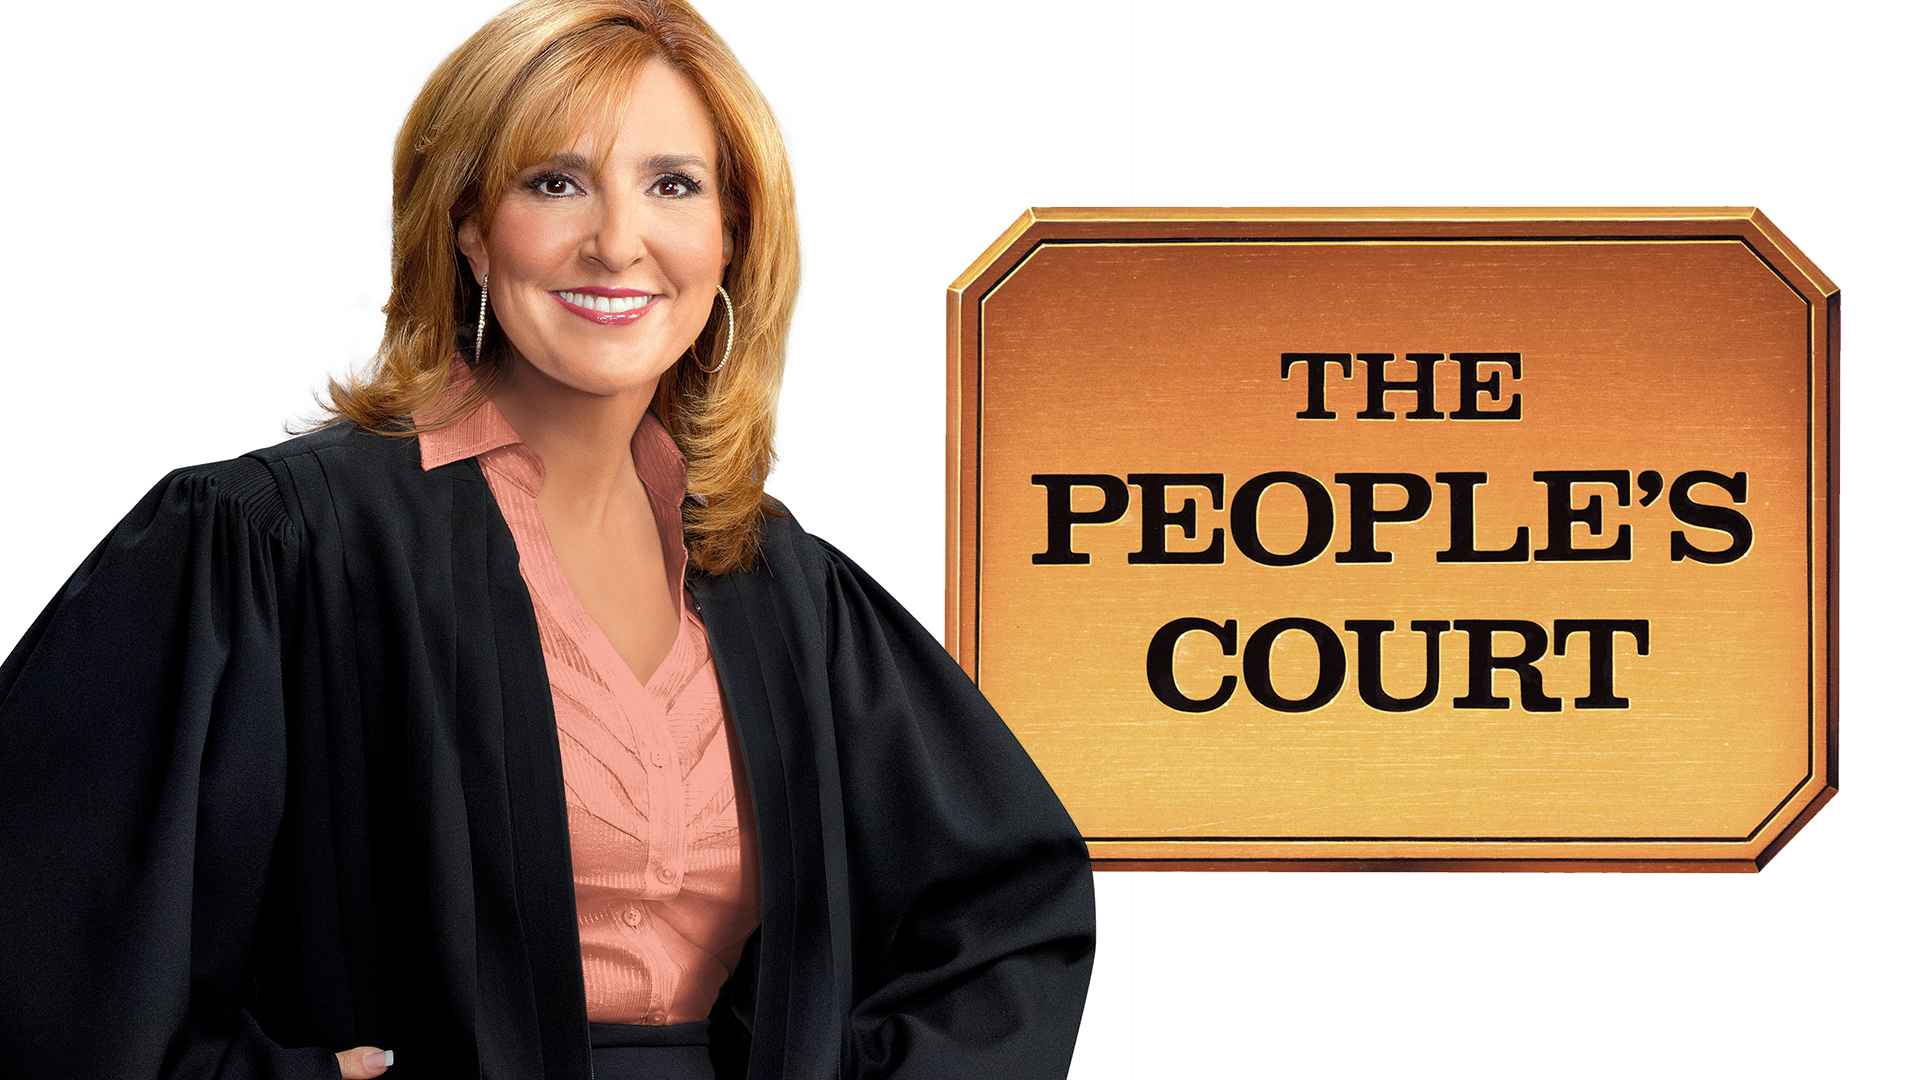 The People s Court Season 26 Episode 28: Release Date Streaming Guide